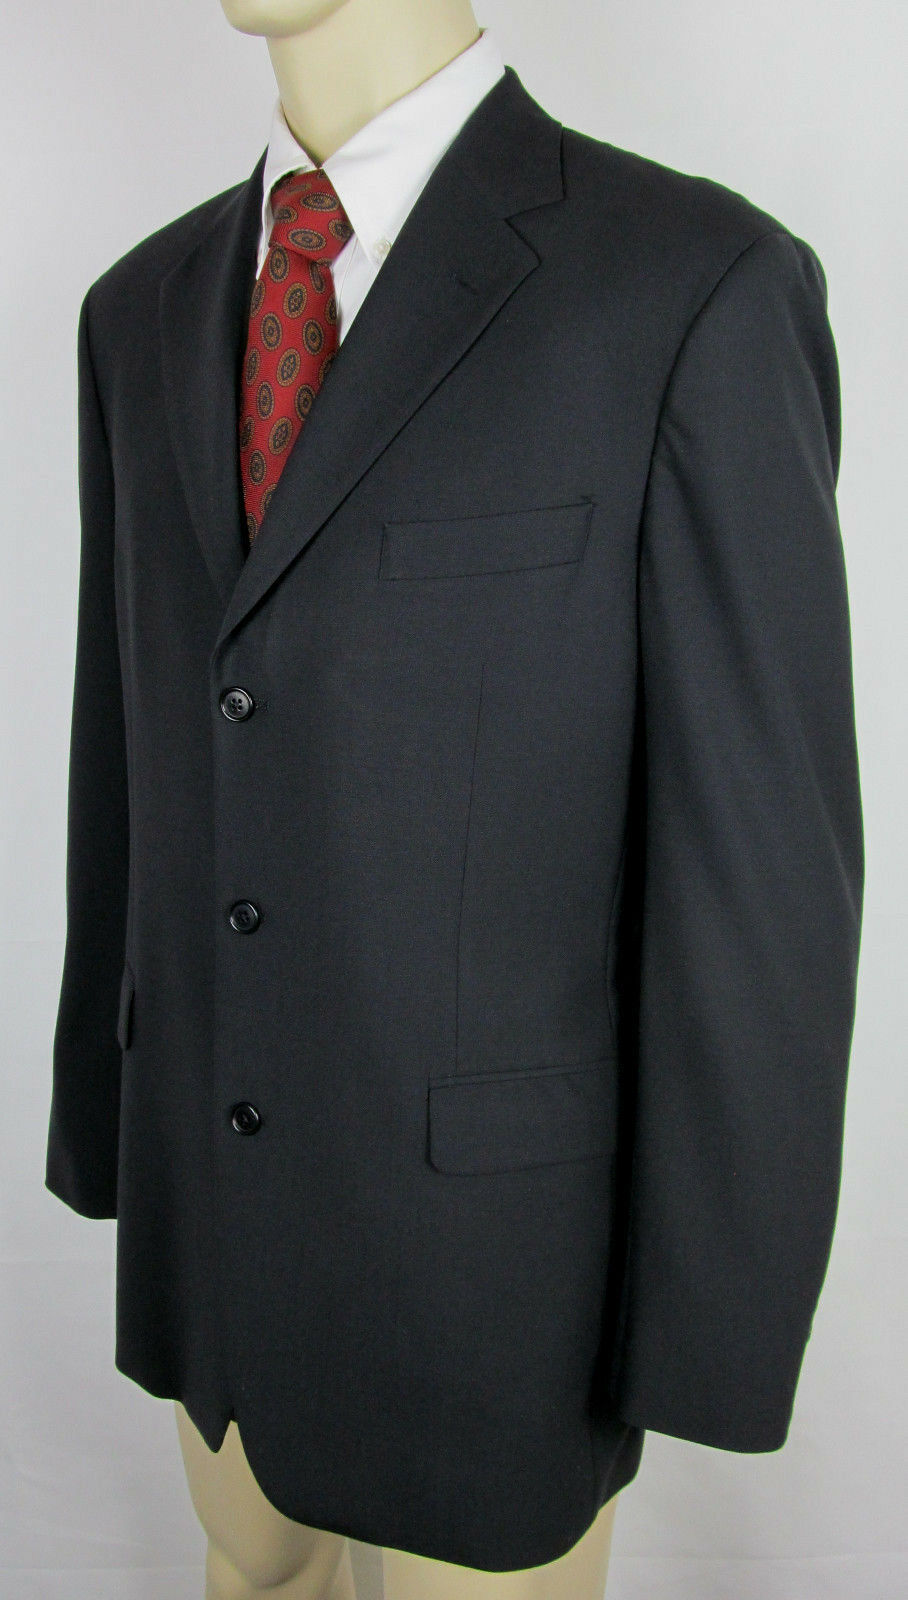 Brooks Brothers 346 Stretch Wool Suit jacket Sport coat Three button ...